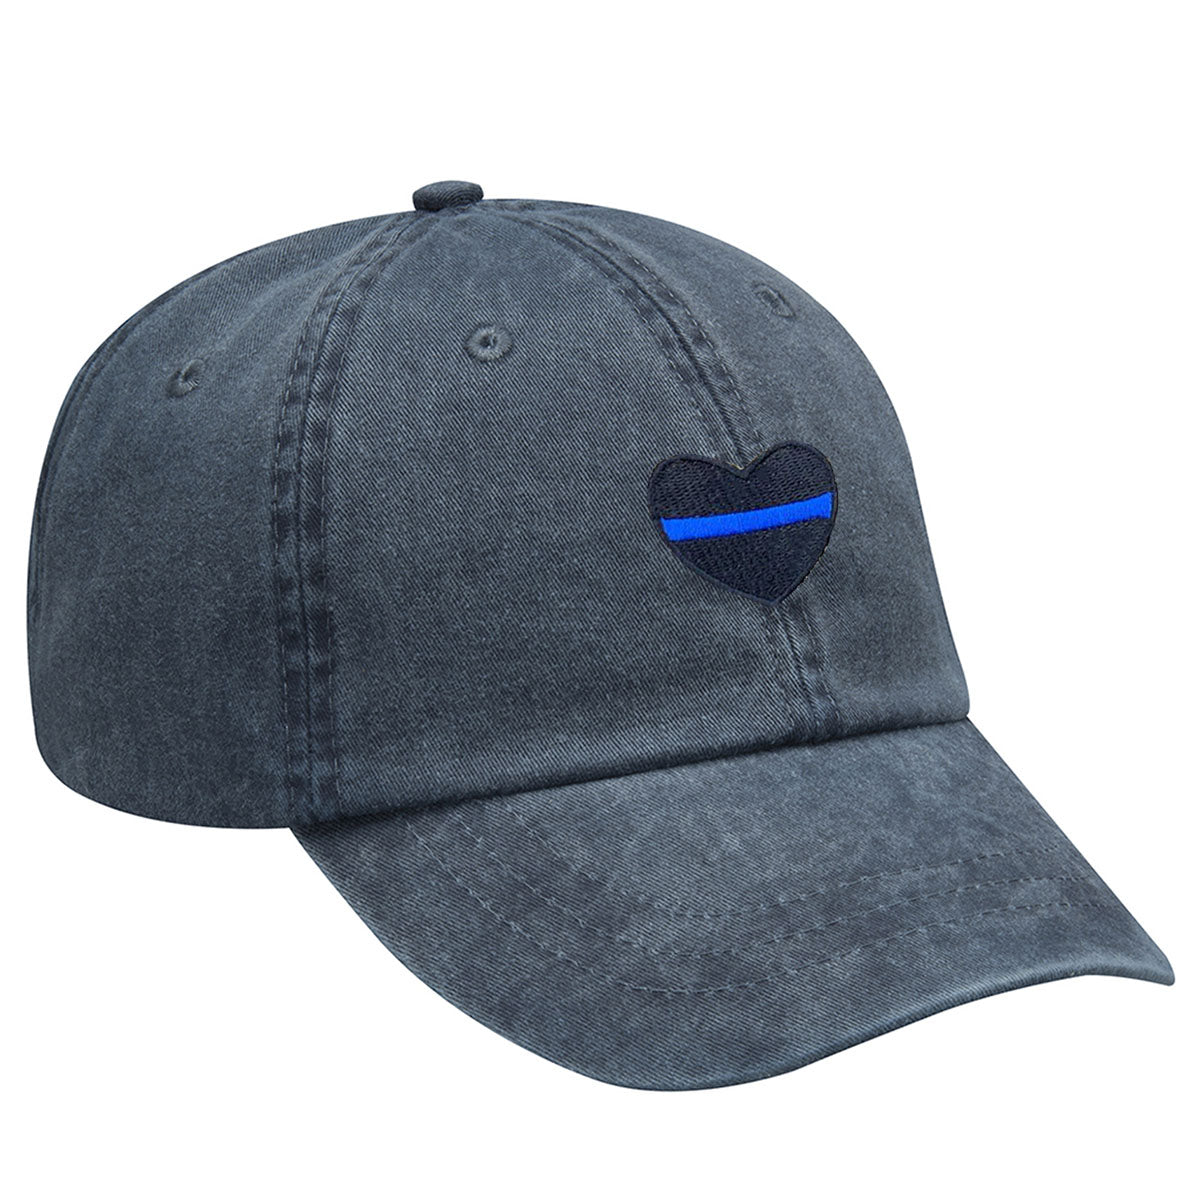 Thin Blue Line Heart Embroidered Baseball Cap